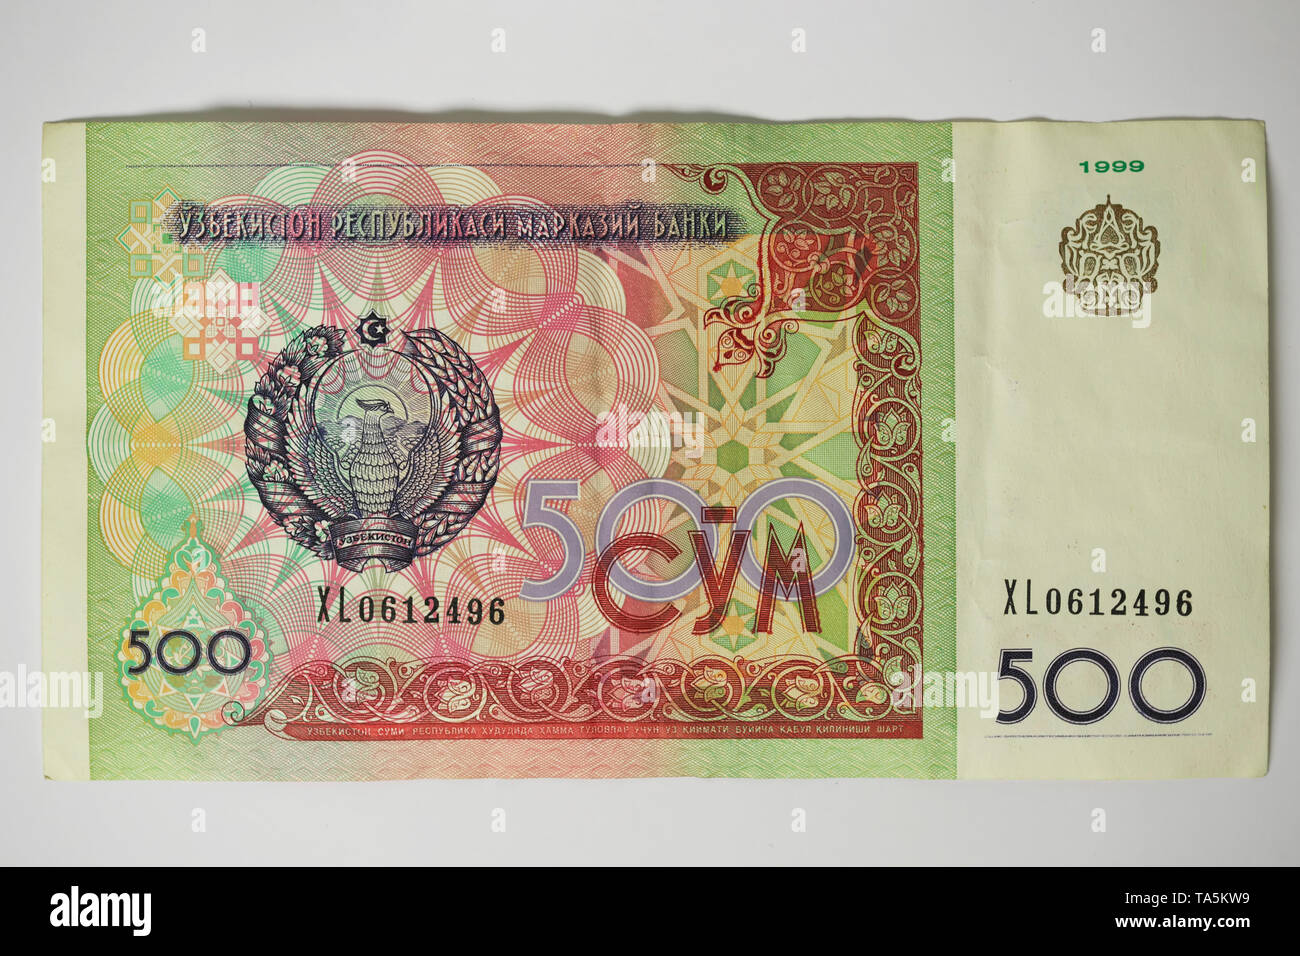 Treasury card of the Central Bank of Uzbekistan in the value of five hundred sum, second-hand, paper money close-up Stock Photo